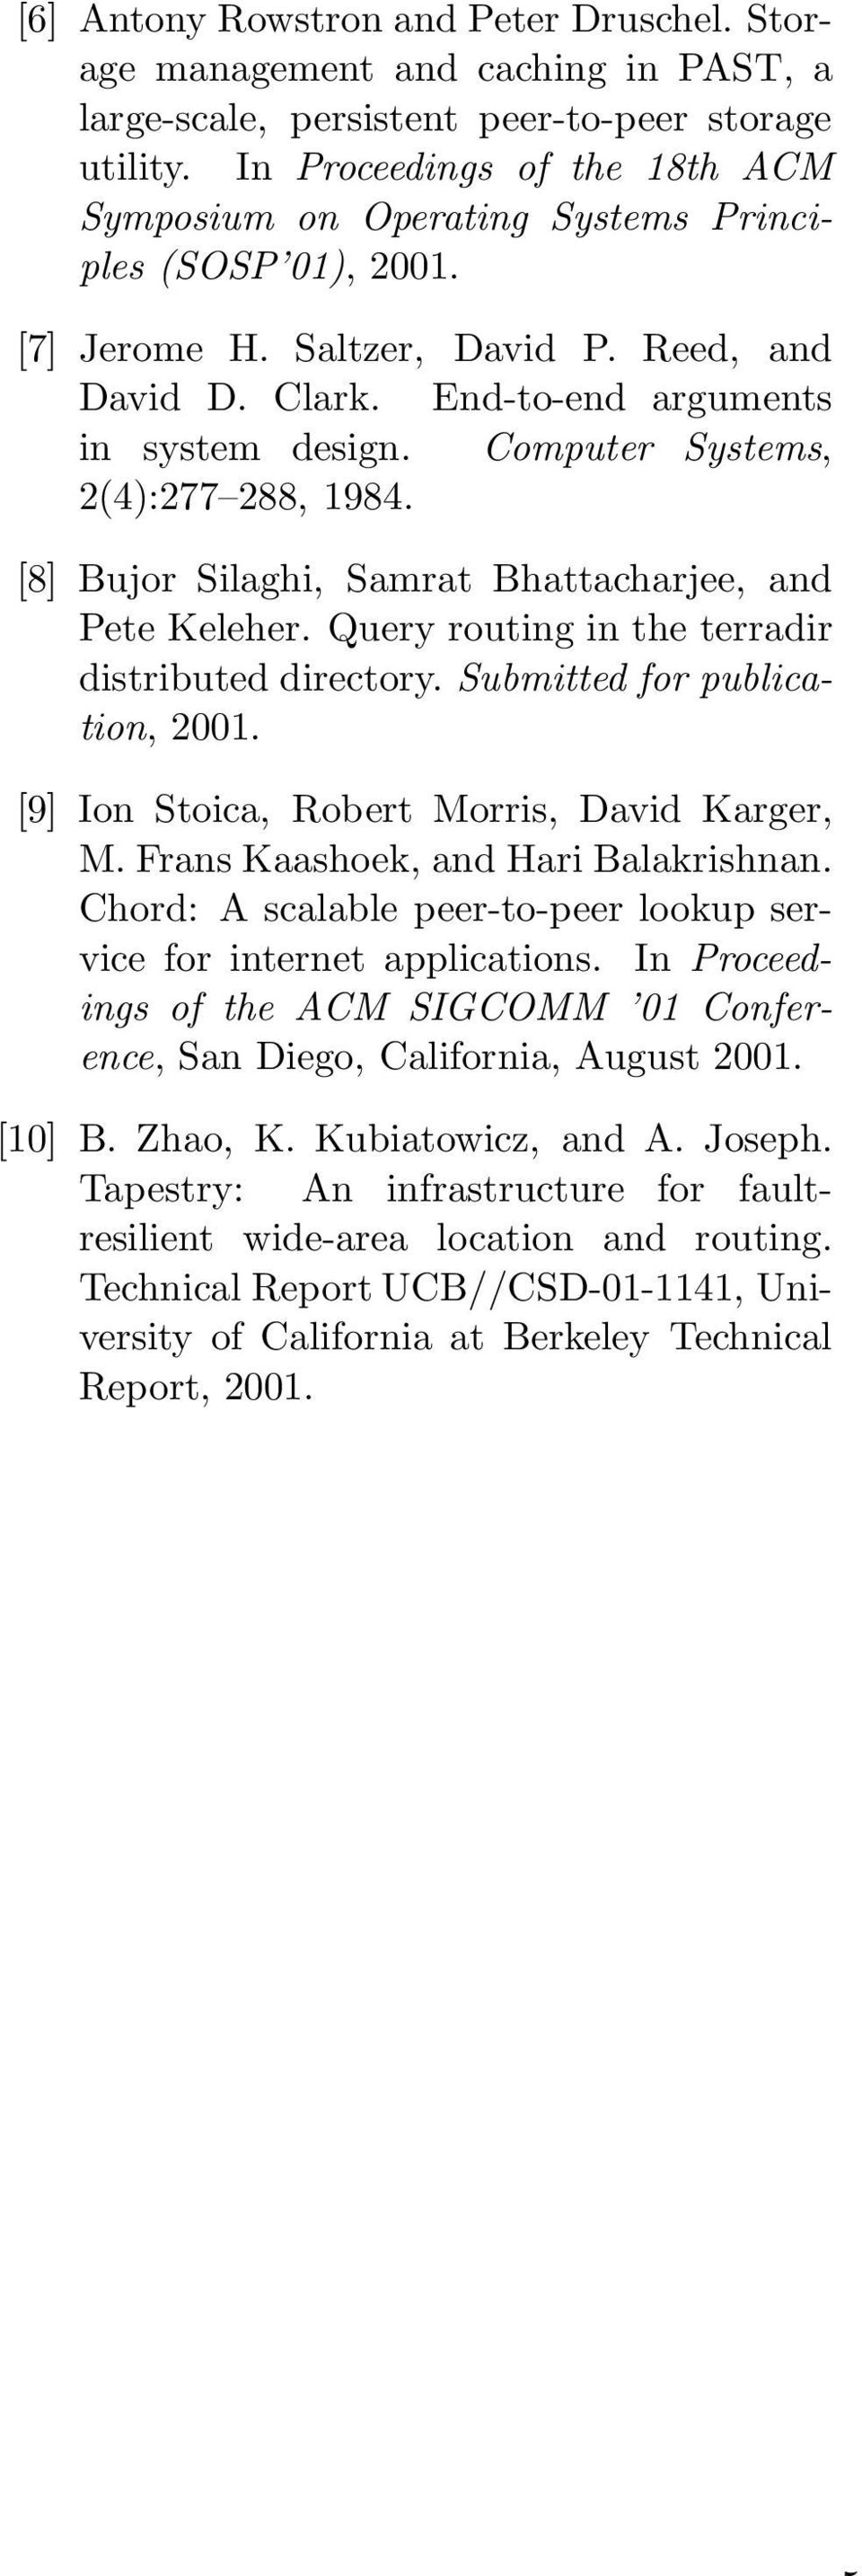 Computer Systems, 2(4):277 288, 1984. [8] Bujor Silaghi, Samrat Bhattacharjee, and Pete Keleher. Query routing in the terradir distributed directory. Submitted for publication, 2001.